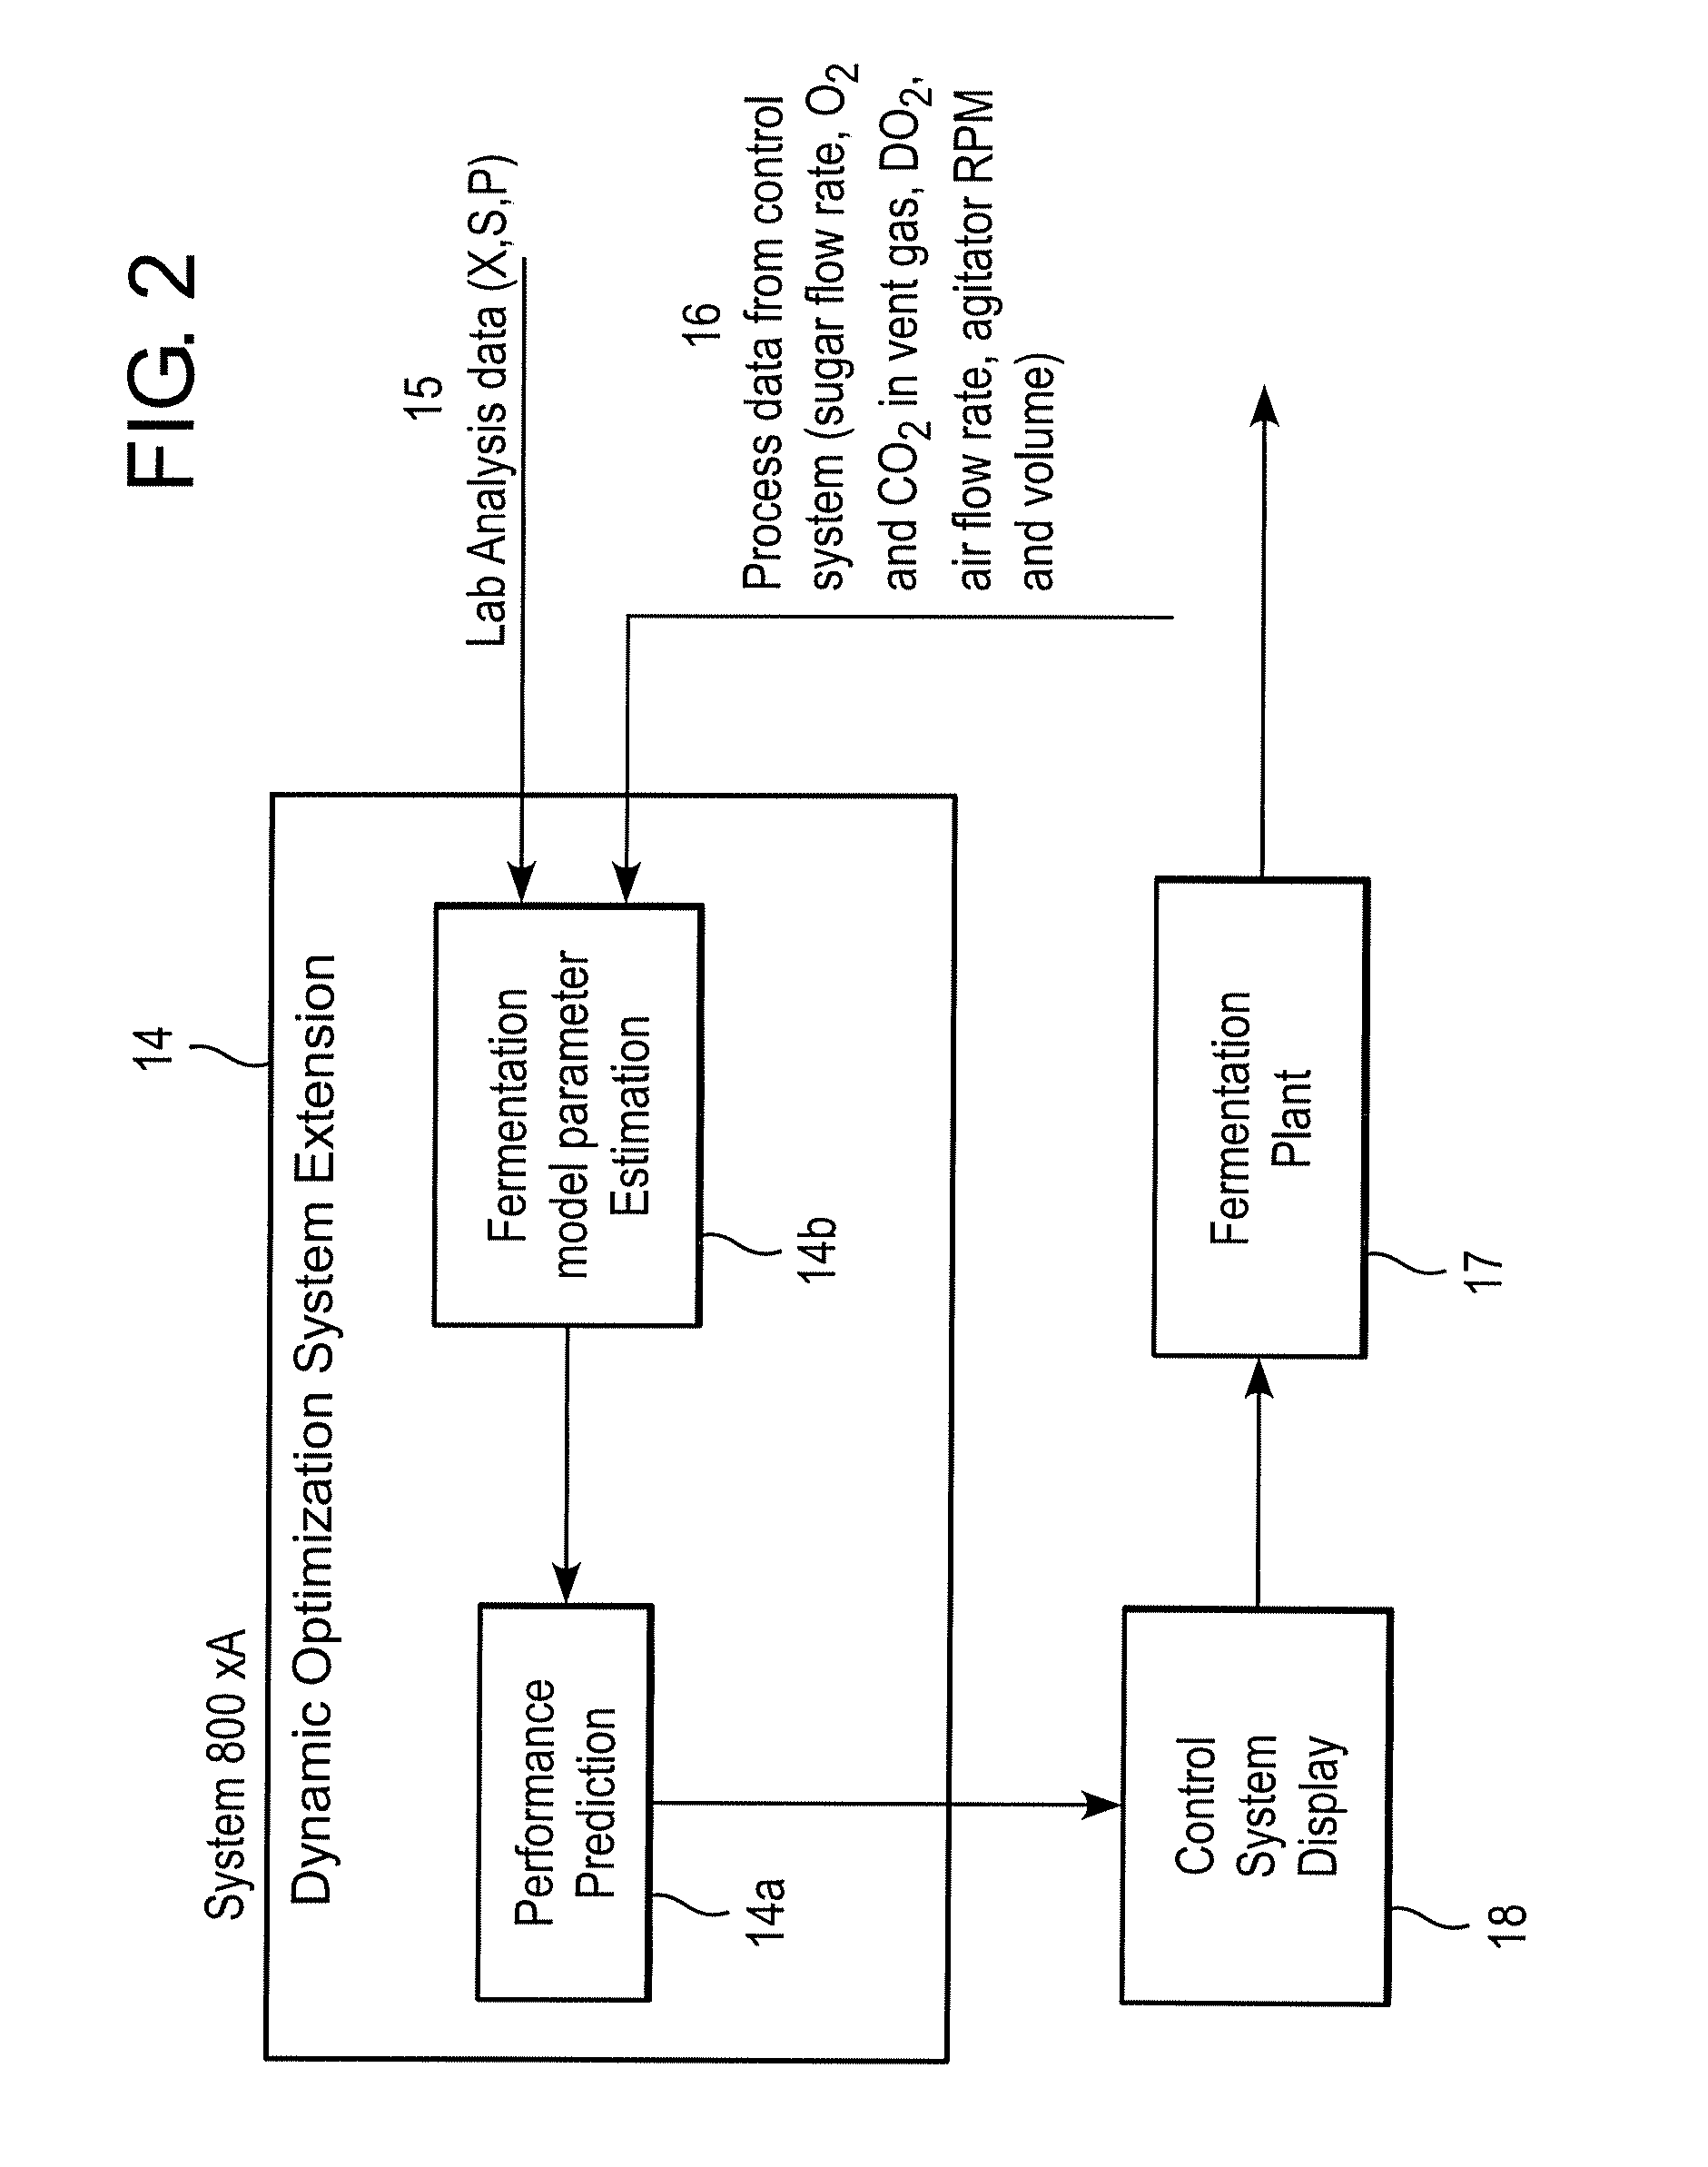 Method for on-line prediction of future performance of a fermentation unit